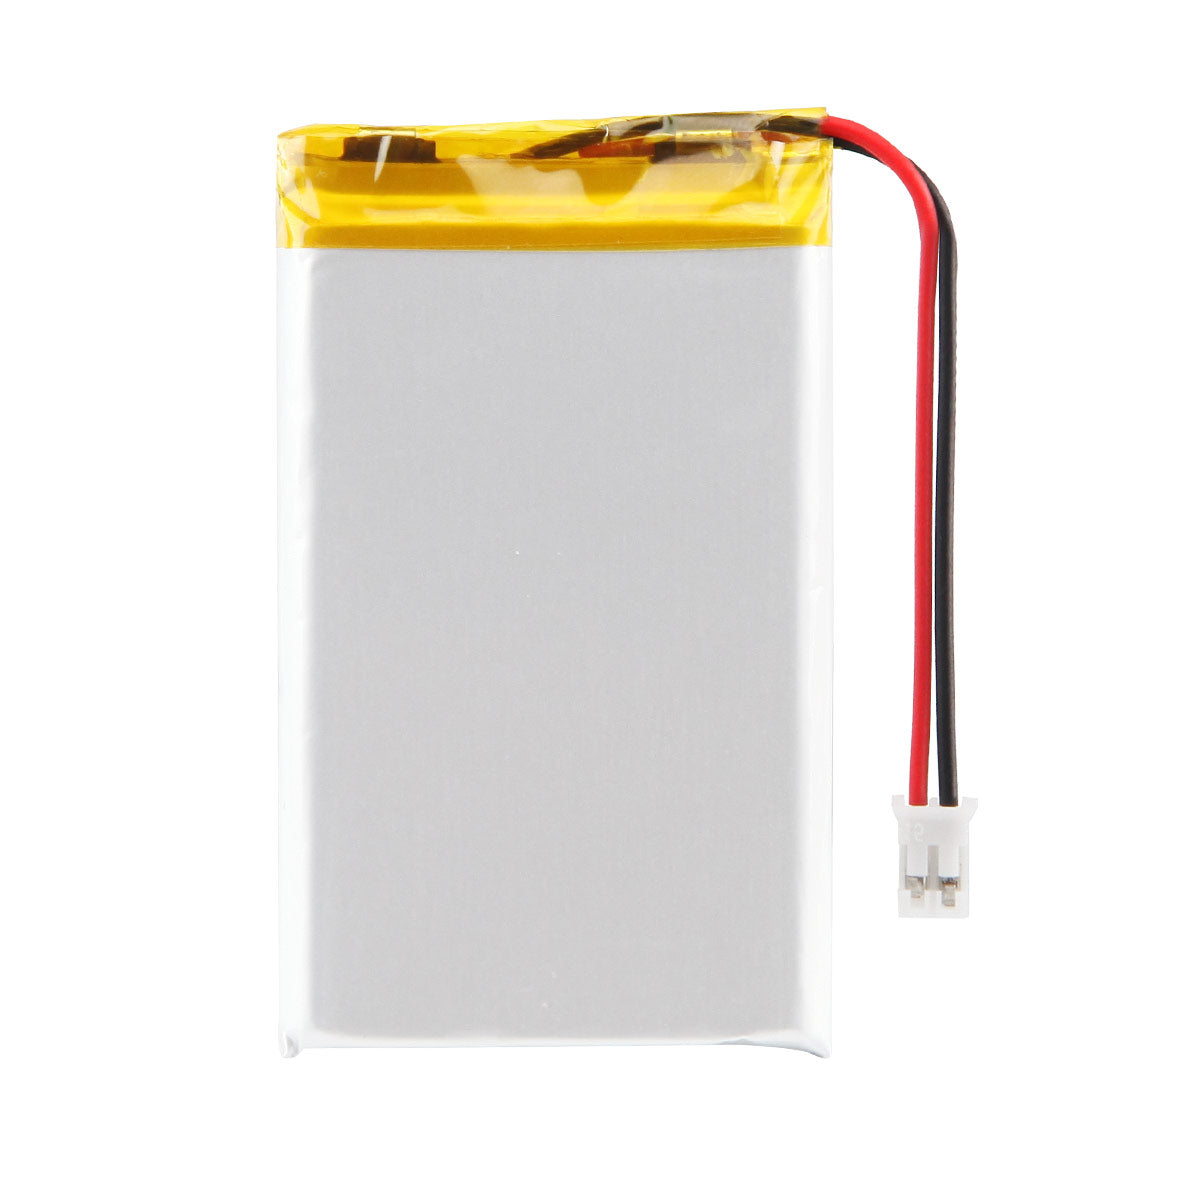 YDL 3.7V 2800mAh 704070/804070 Rechargeable Lithium  Polymer Battery